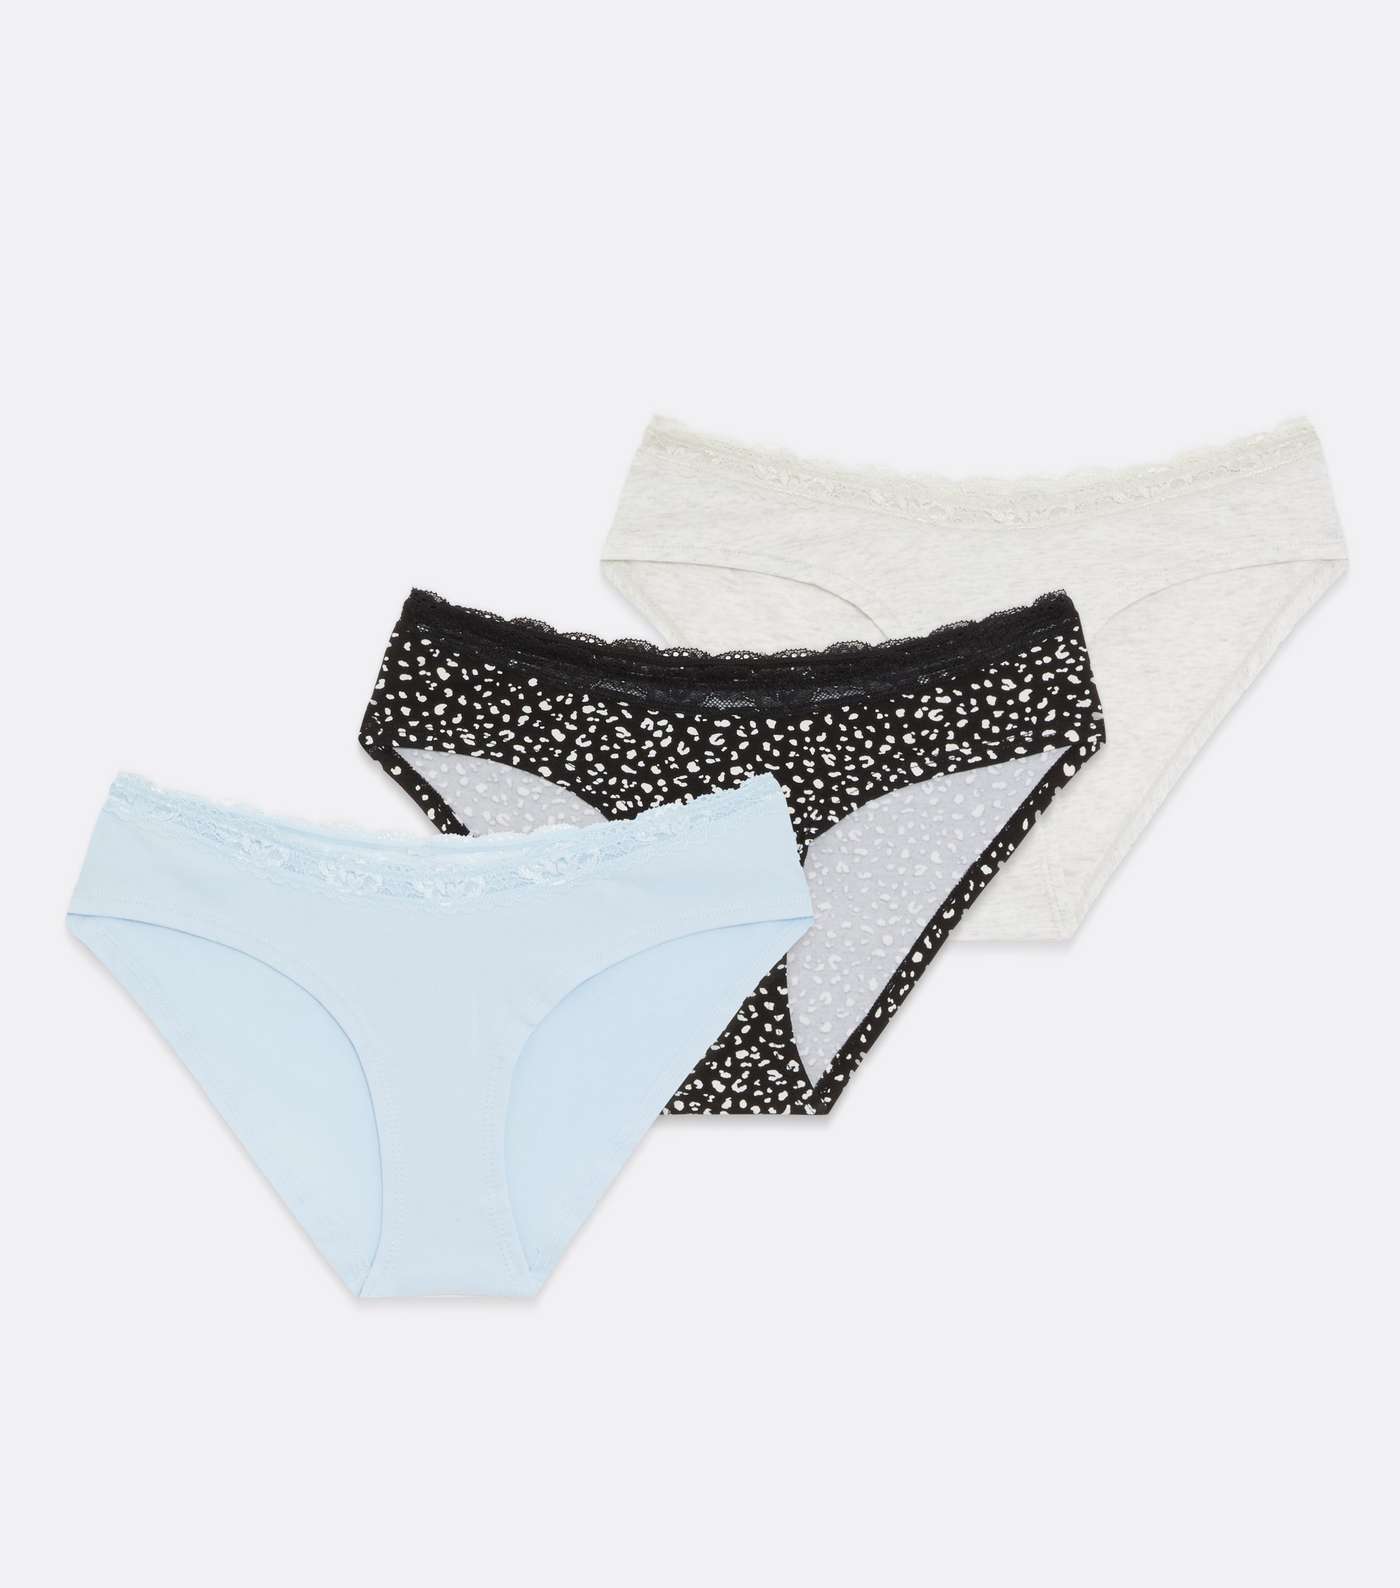 Maternity 3 Pack Pale Blue Cream and Black Animal Print Briefs Image 5